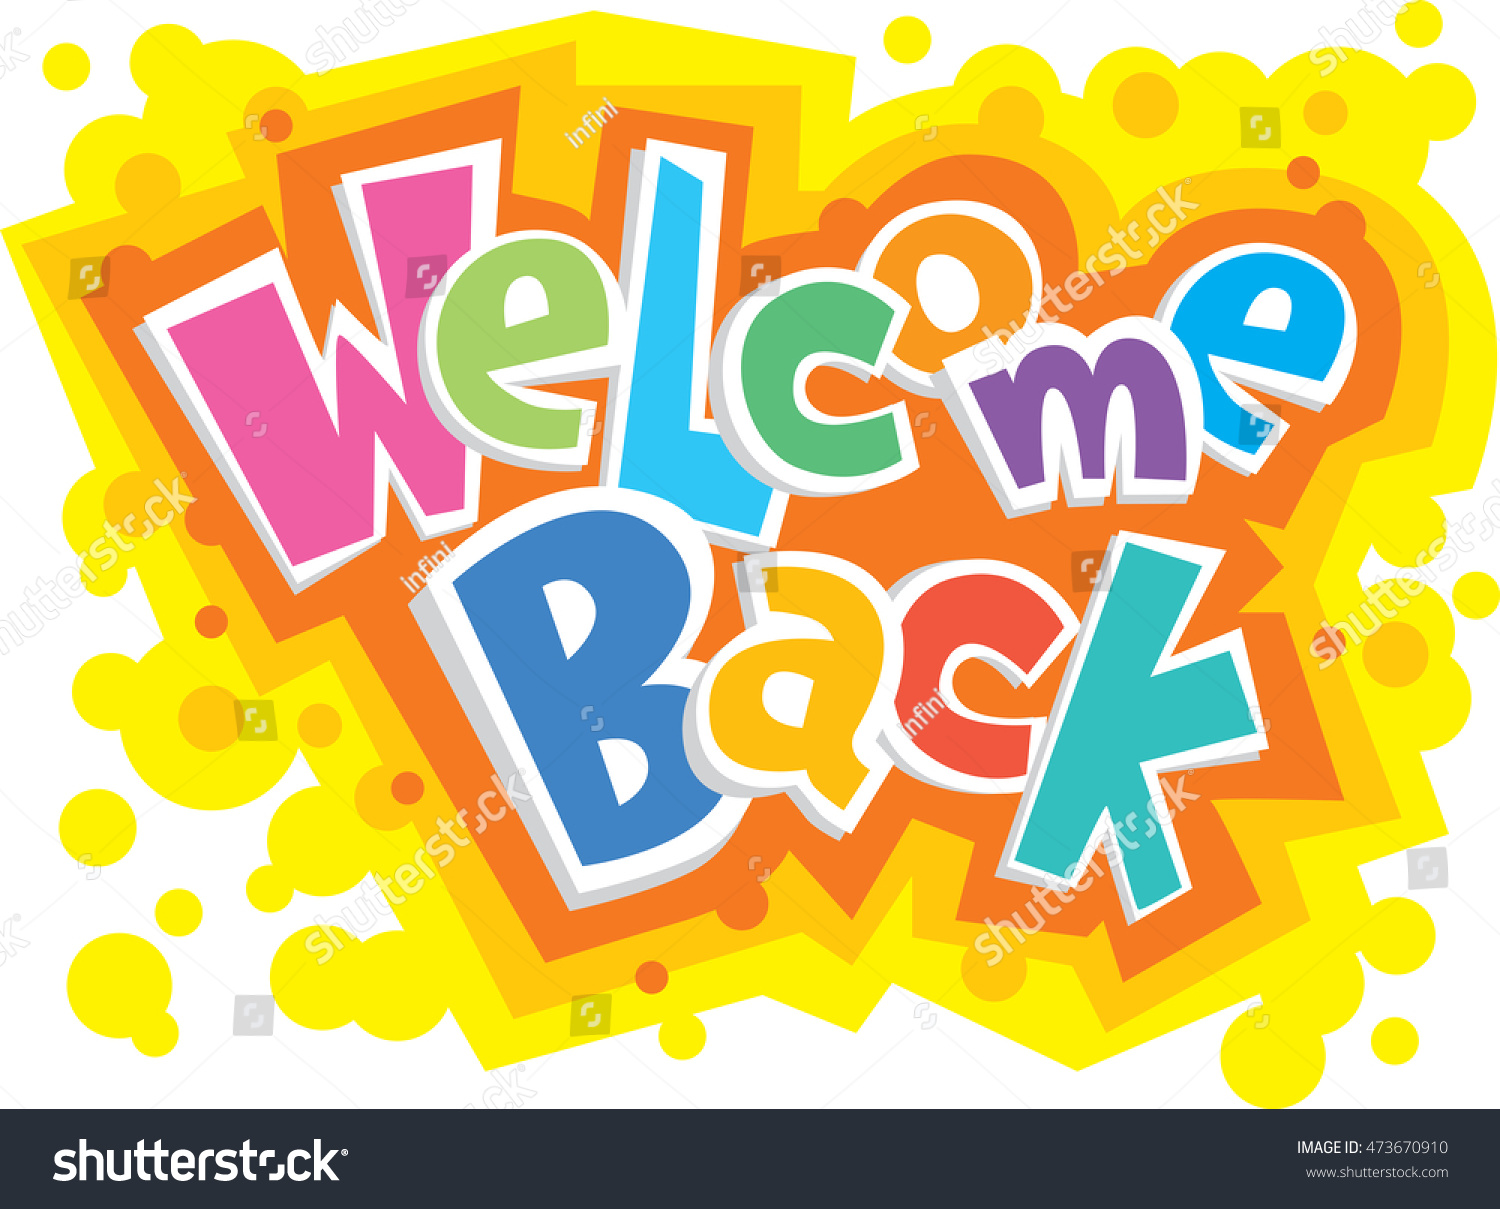 Welcome Back Images Art